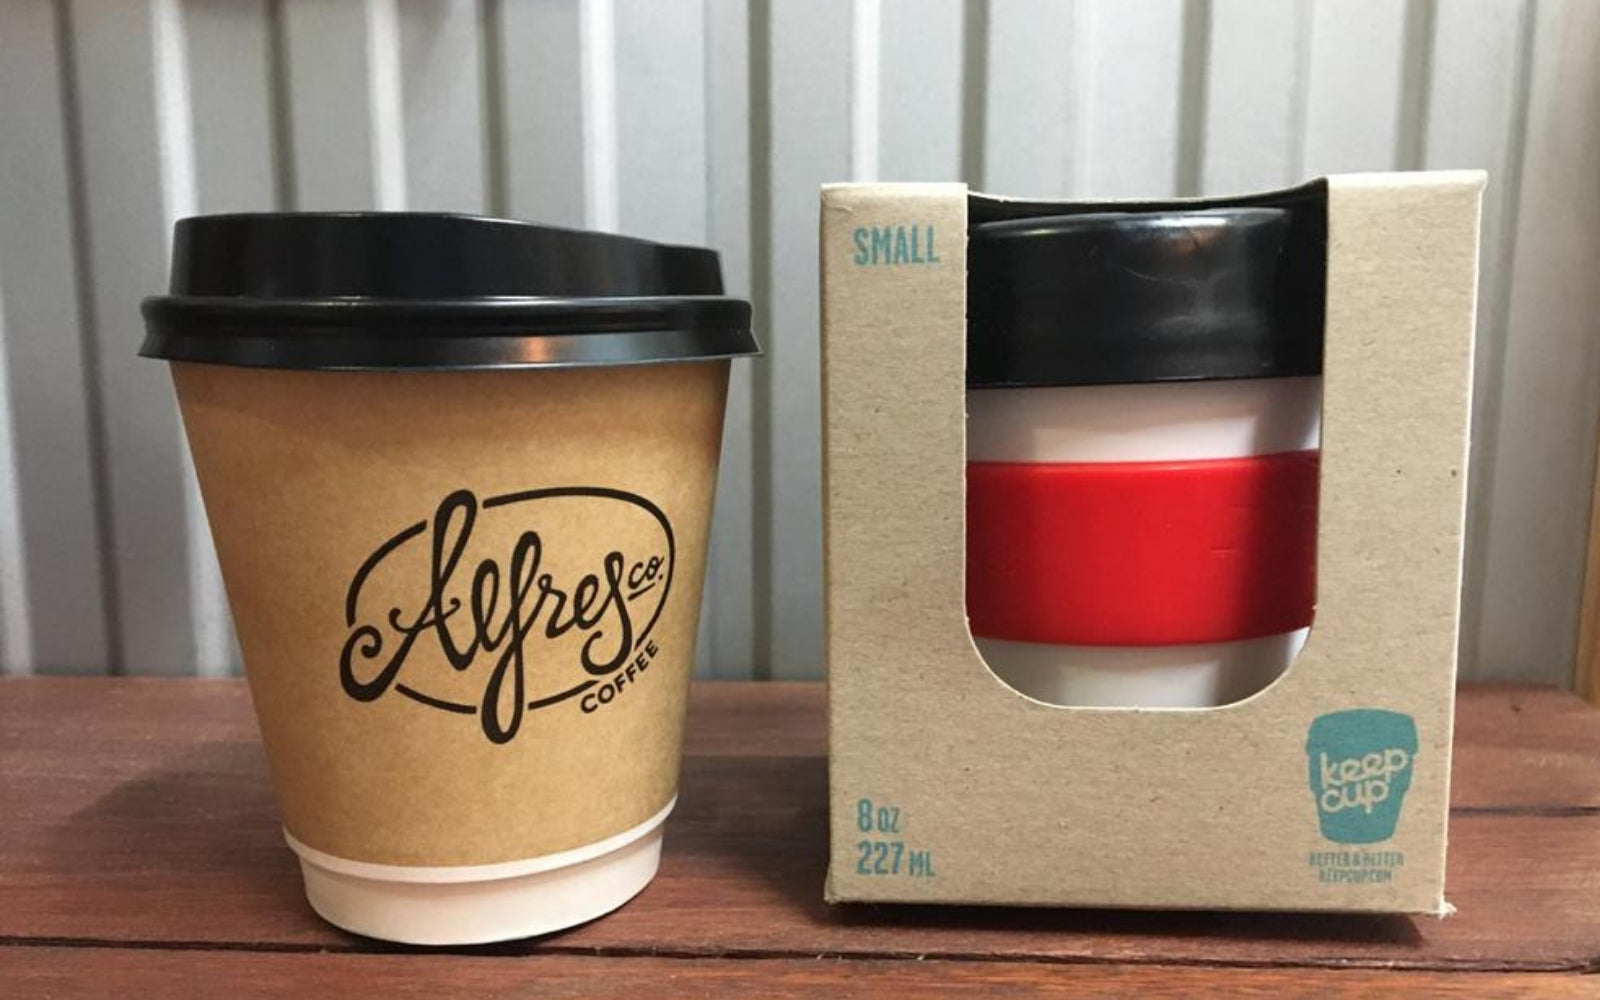 The reusable coffee cup